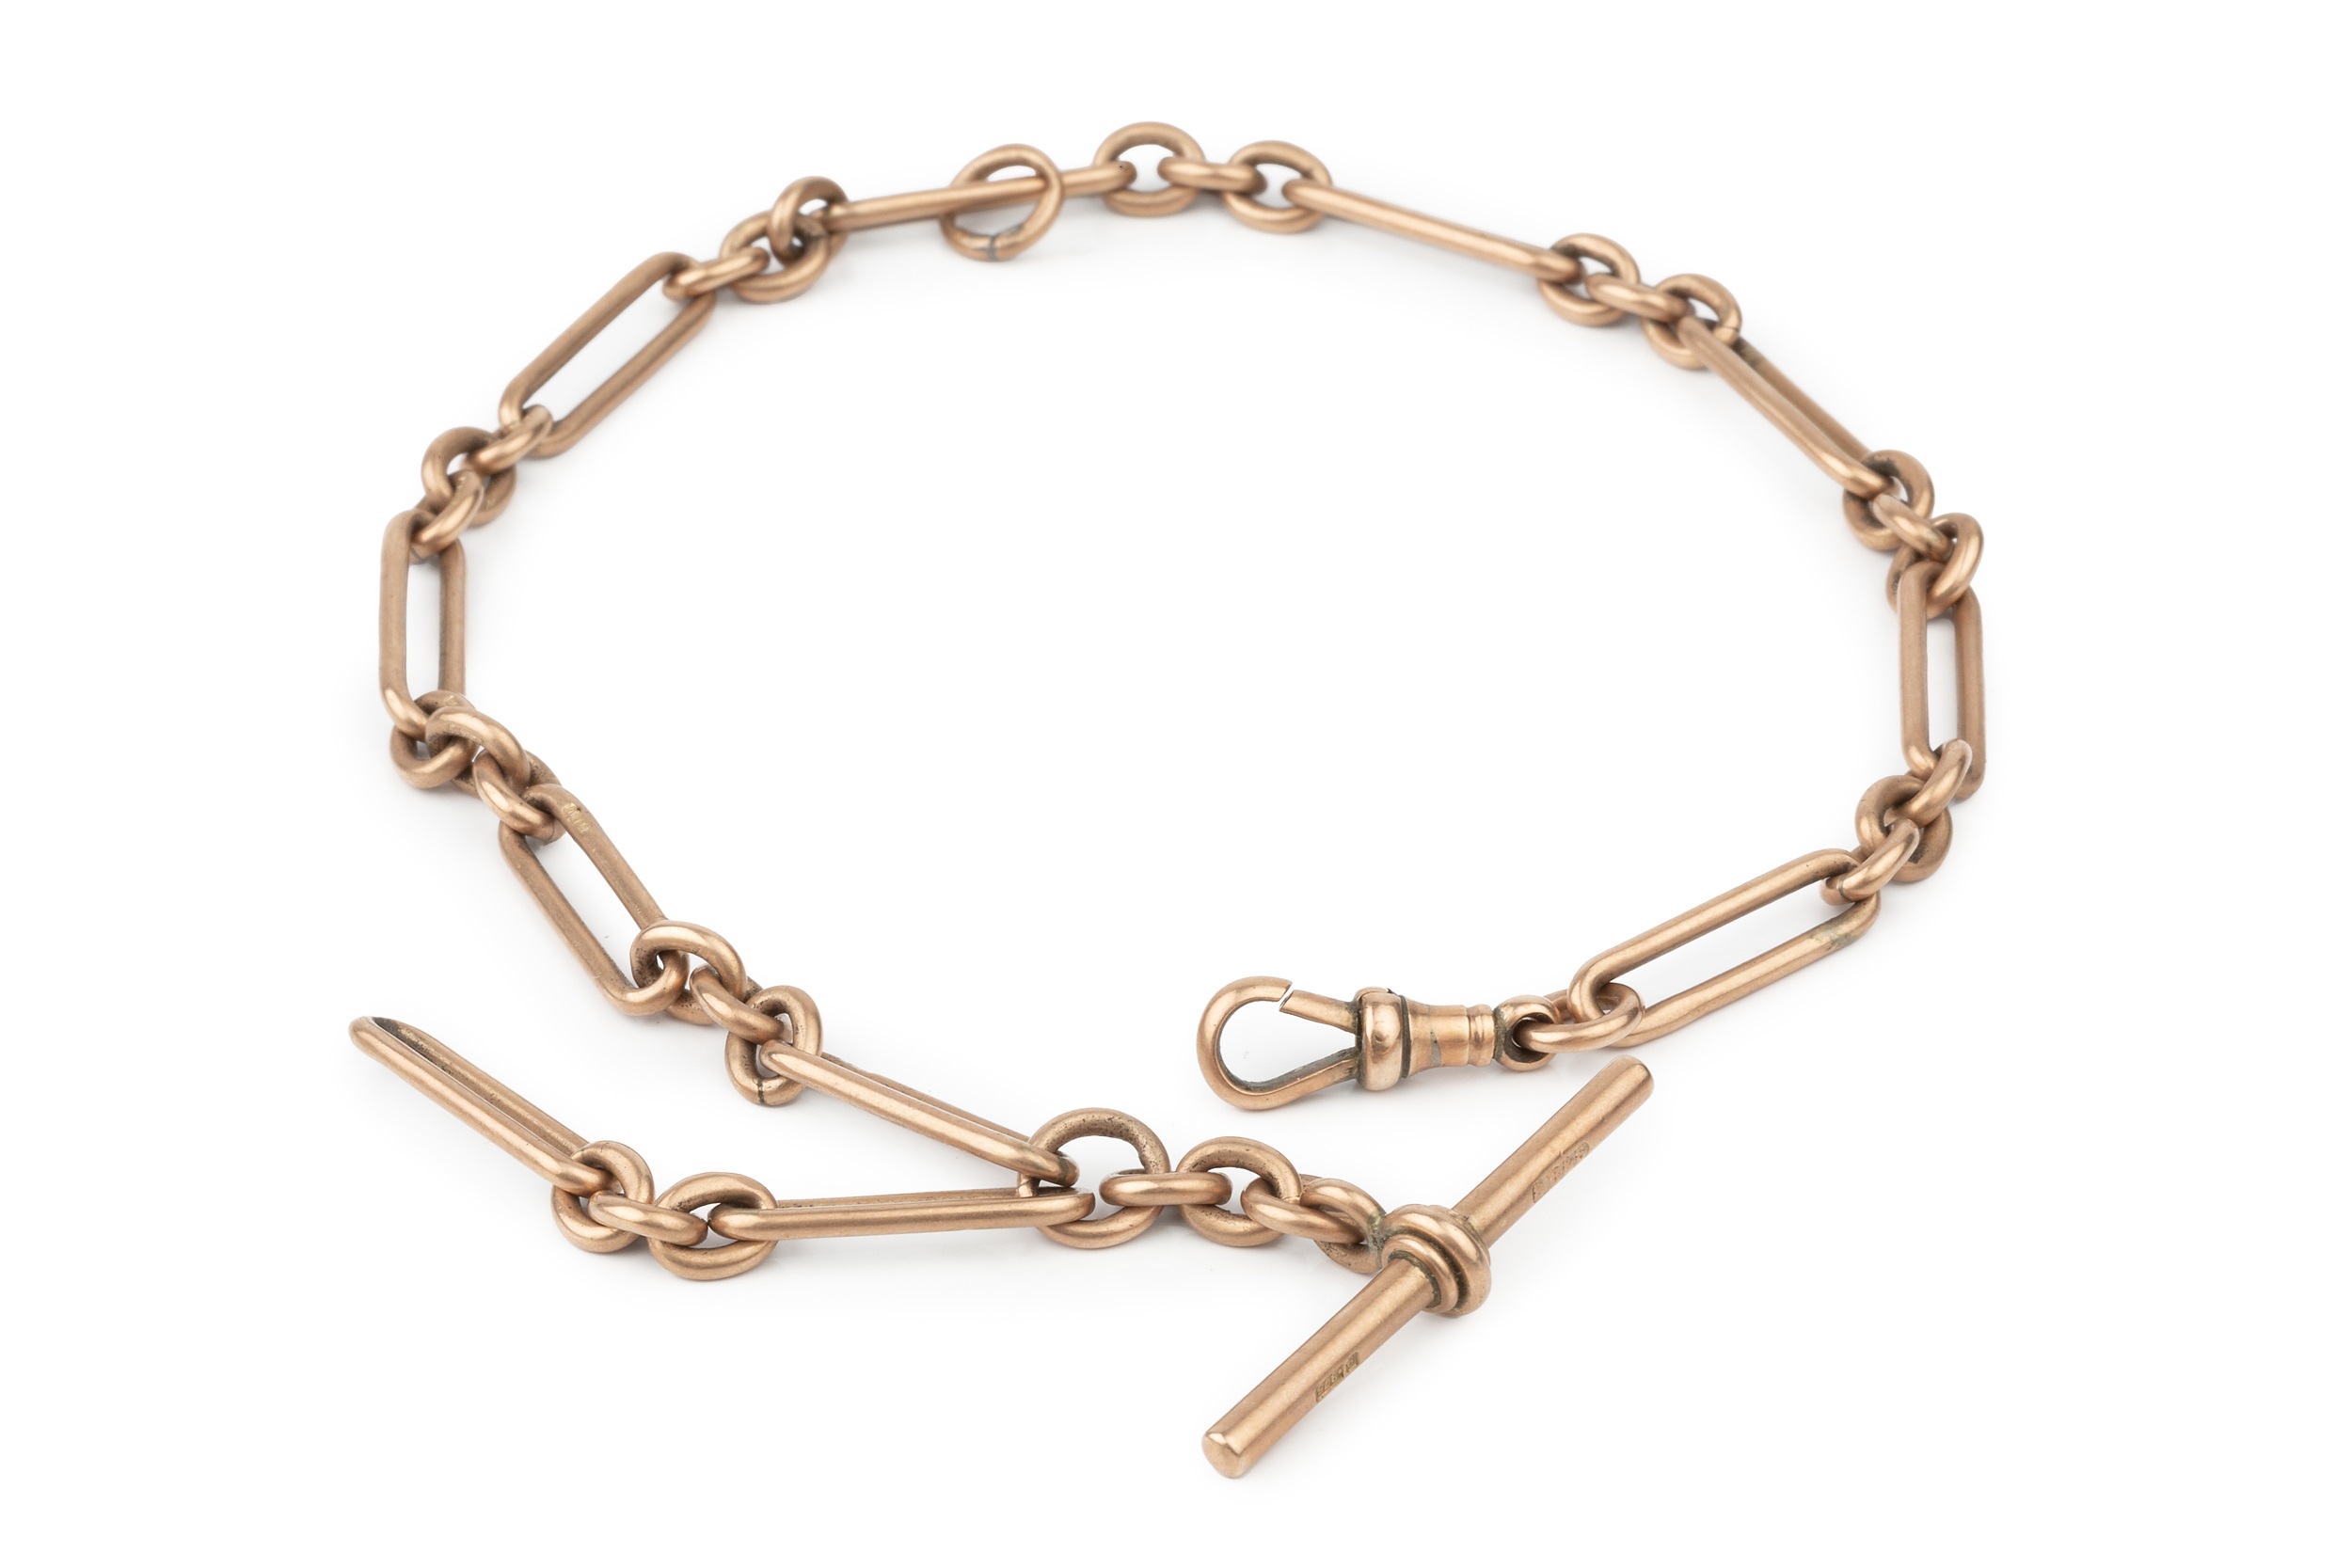 A 9ct gold albert chain, with elongated open links and T-bar, 34cm long approx weight 30.3g. The